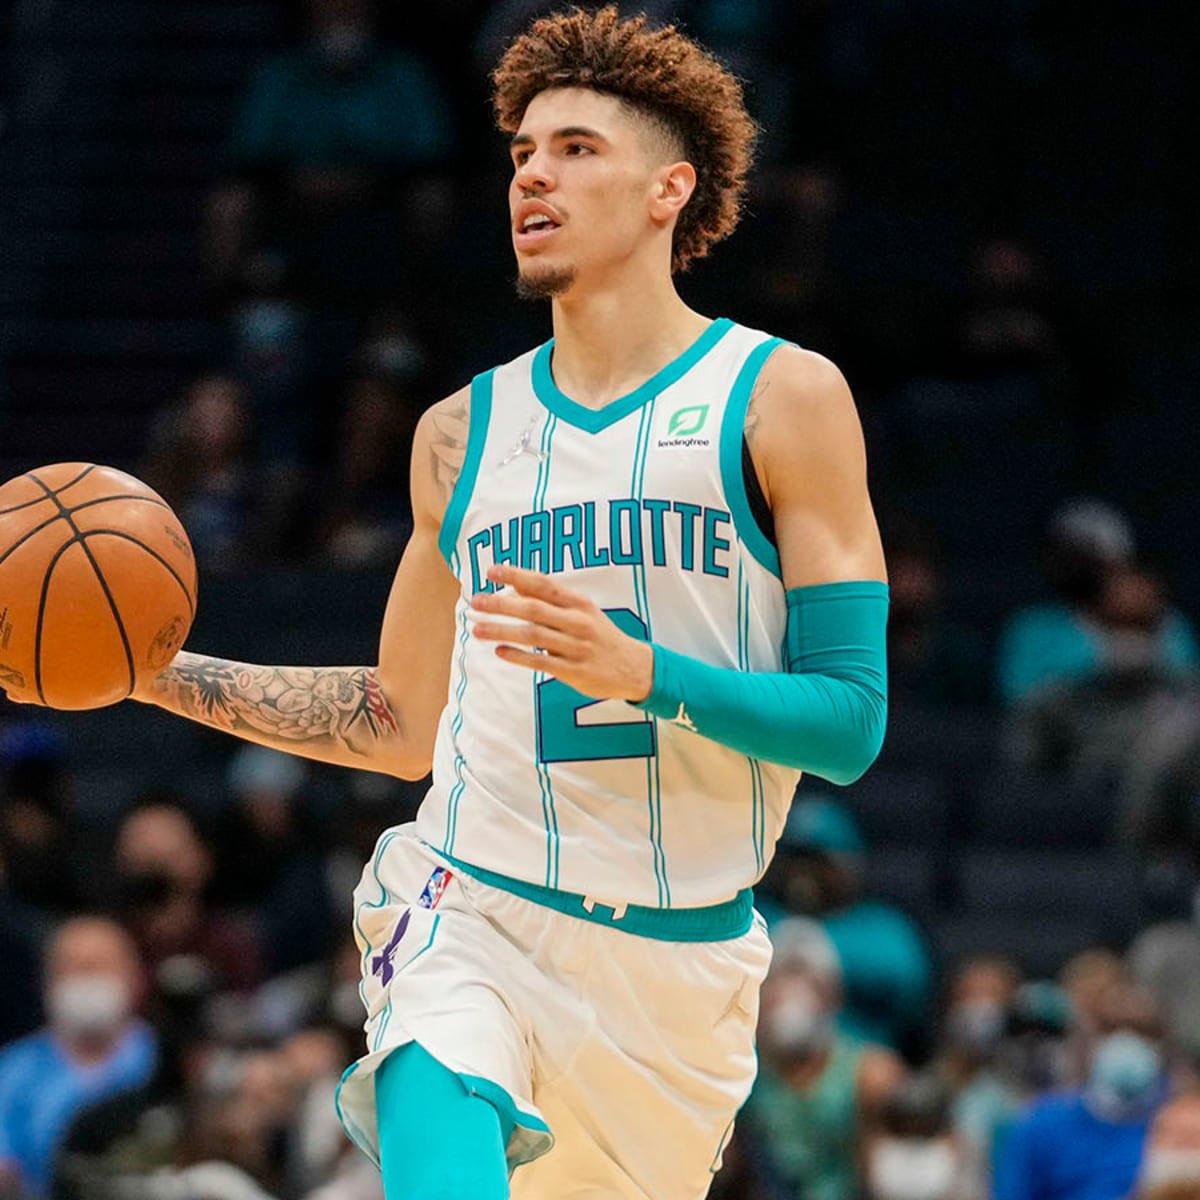 LaMelo Ball tonight:32 Points 11 Rebounds 8 Assists 54% FG. 